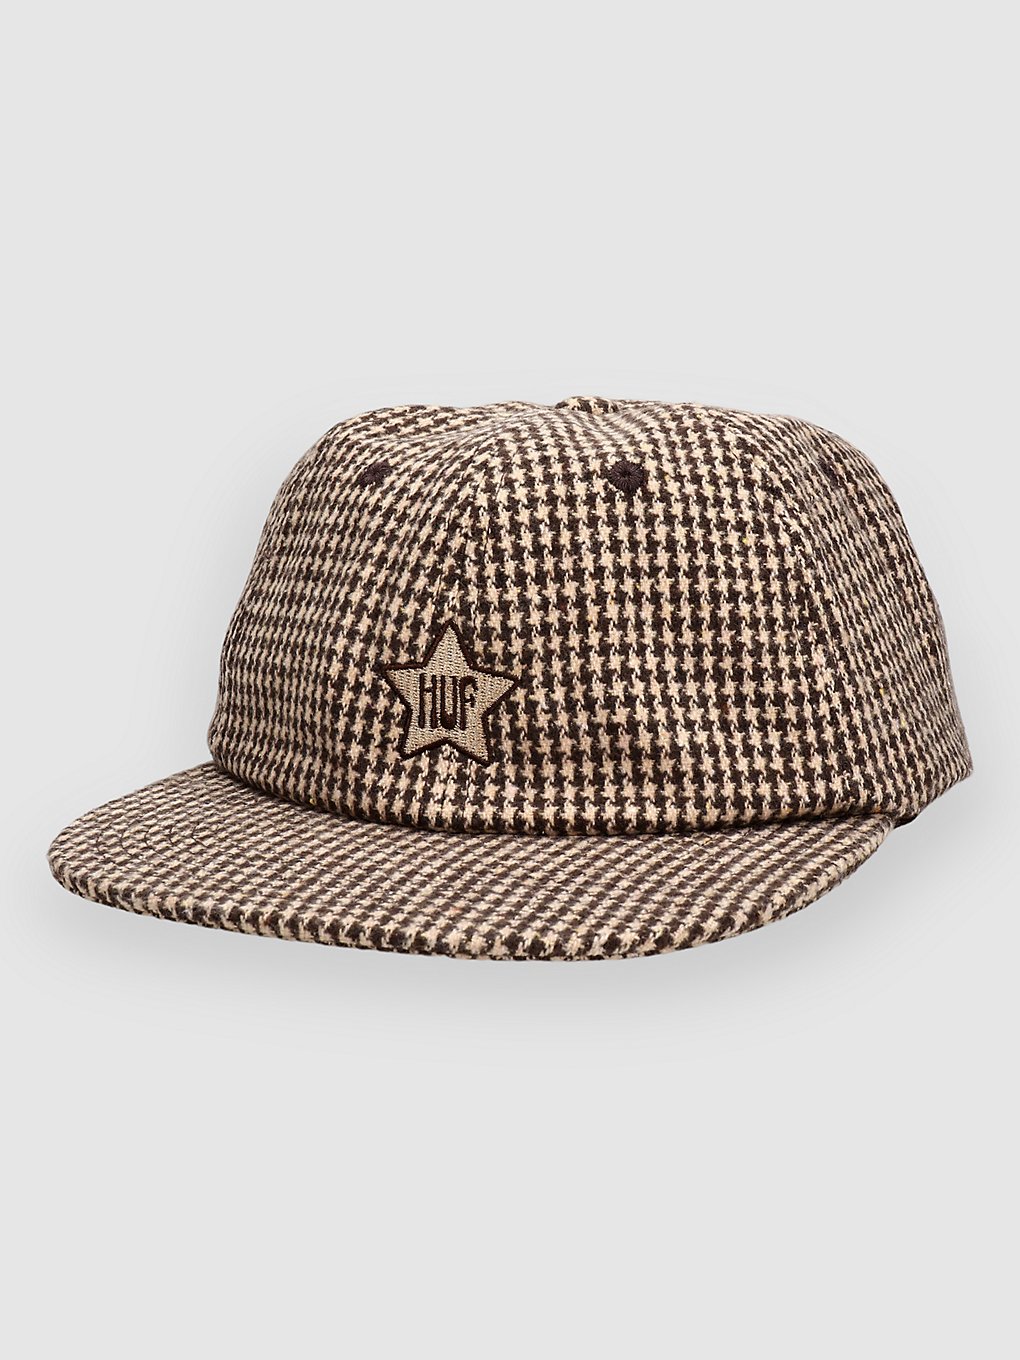 HUF One Star Houndstooth 6 Casquette marron